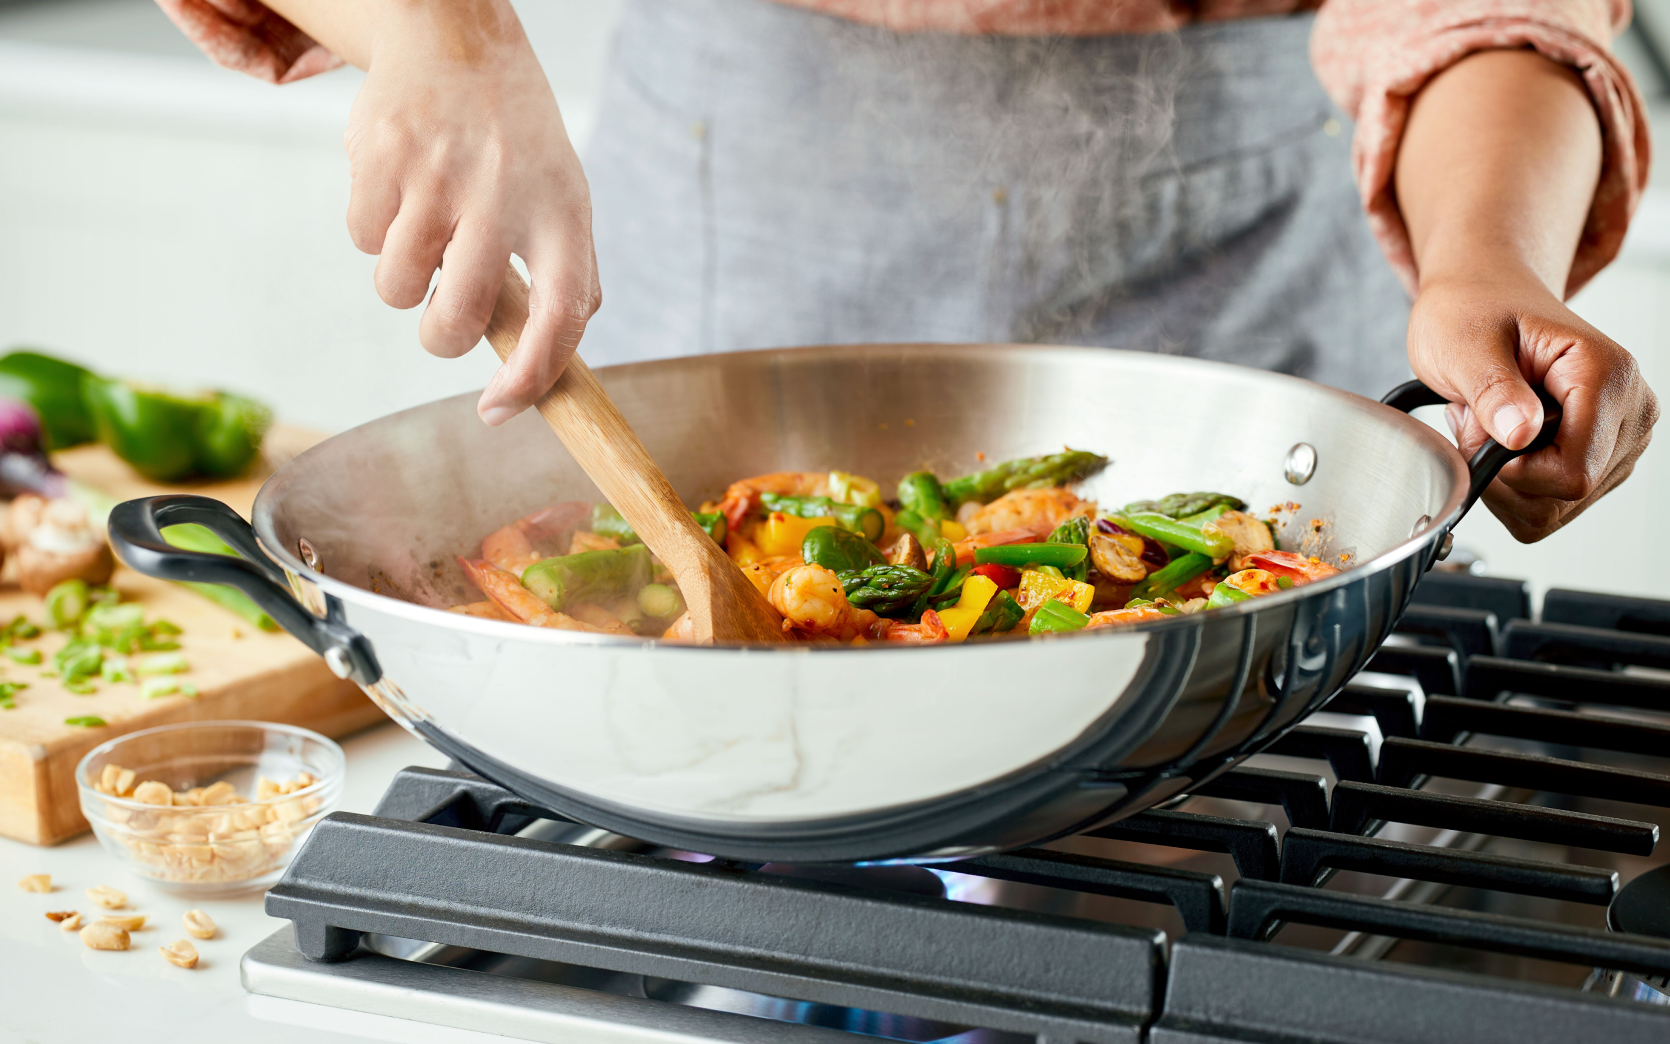 A person cooking with a stainless steel 5-ply base pan.